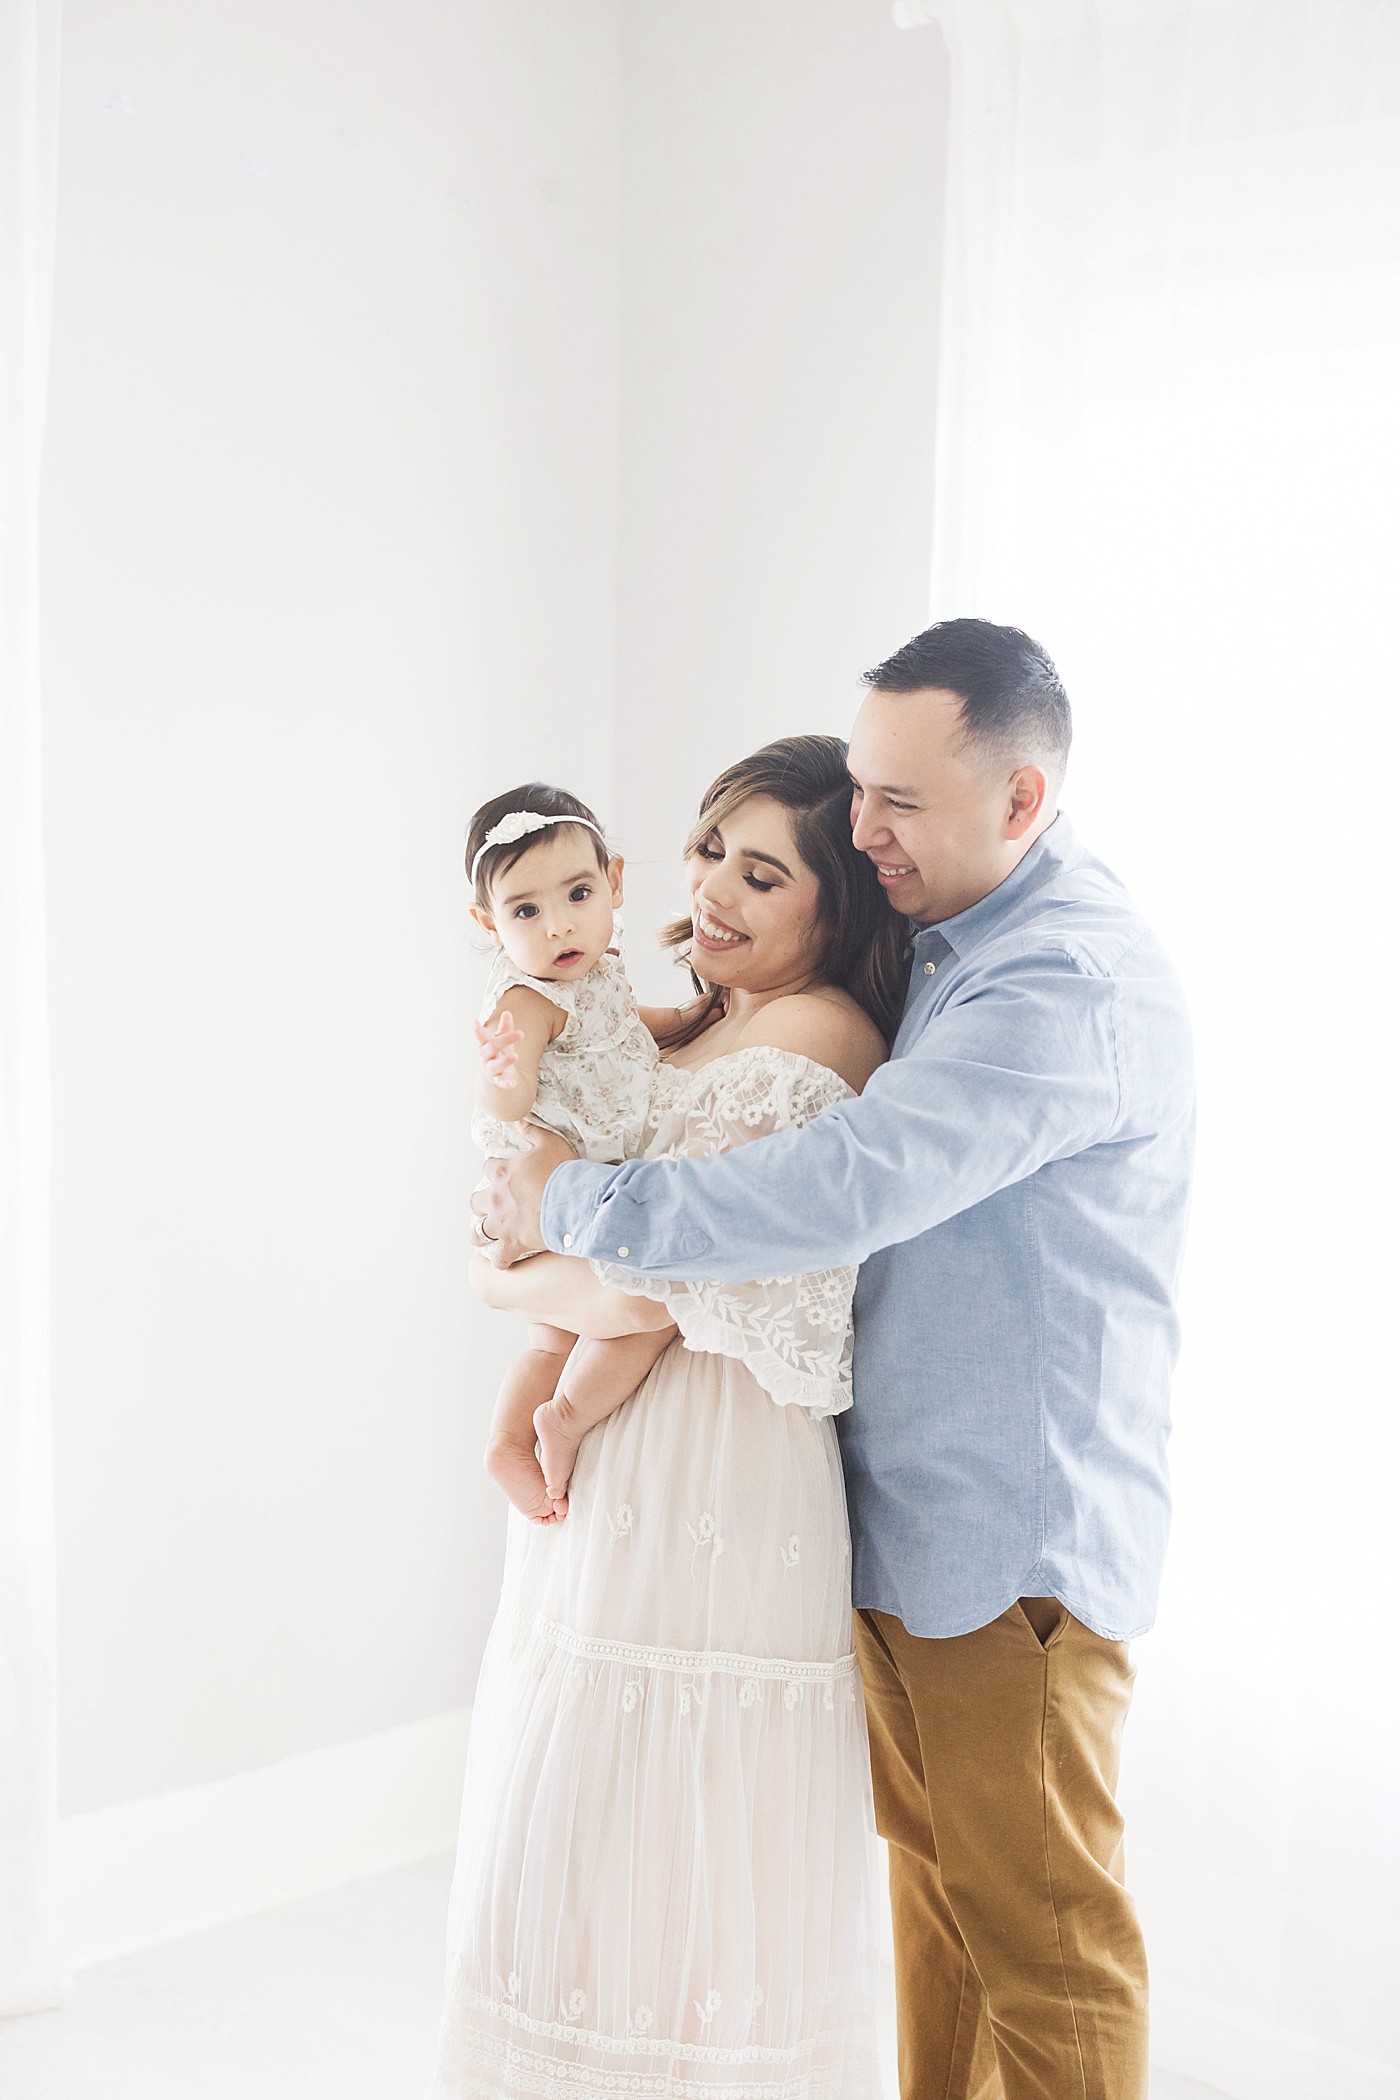 Mom, dad and six month old daughter. Photo by Fresh Light Photography.